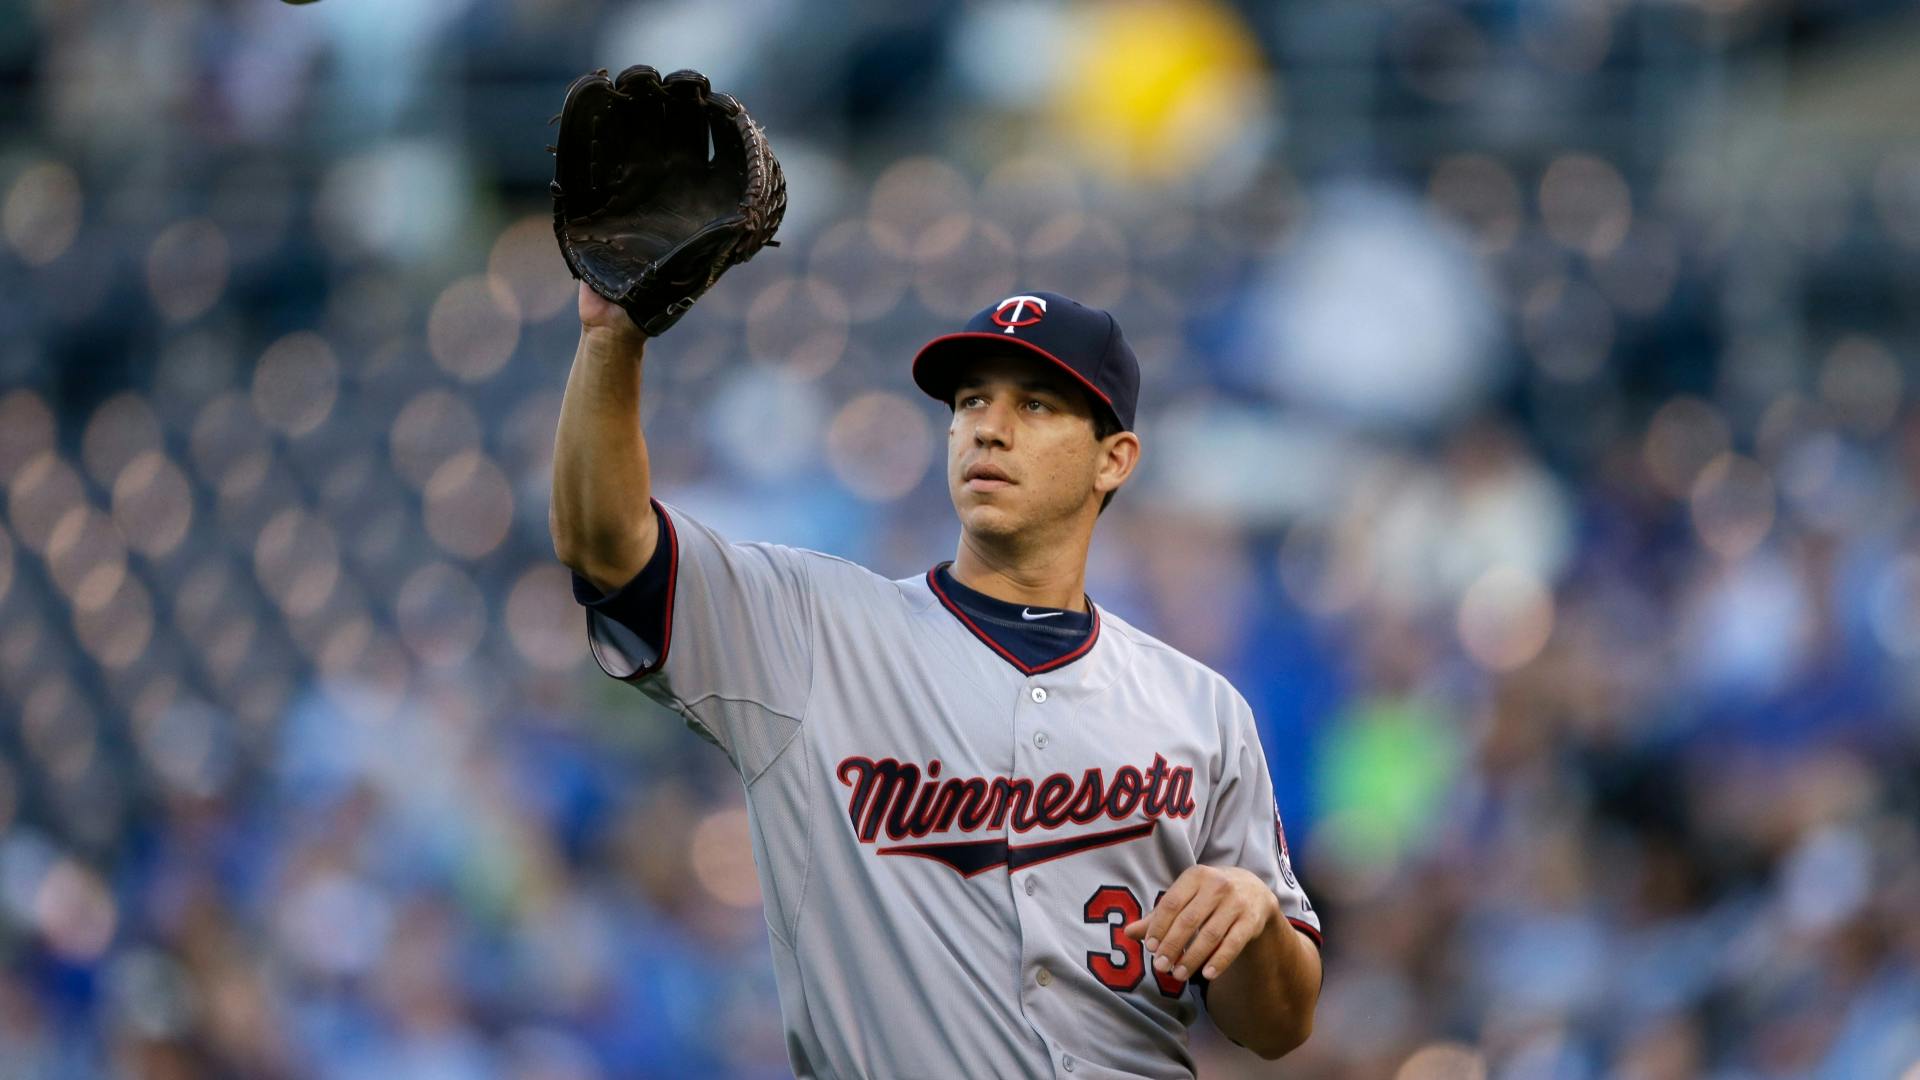 Twins lefthander has a 2.03 ERA this month and is showing why he should remain in the rotation.